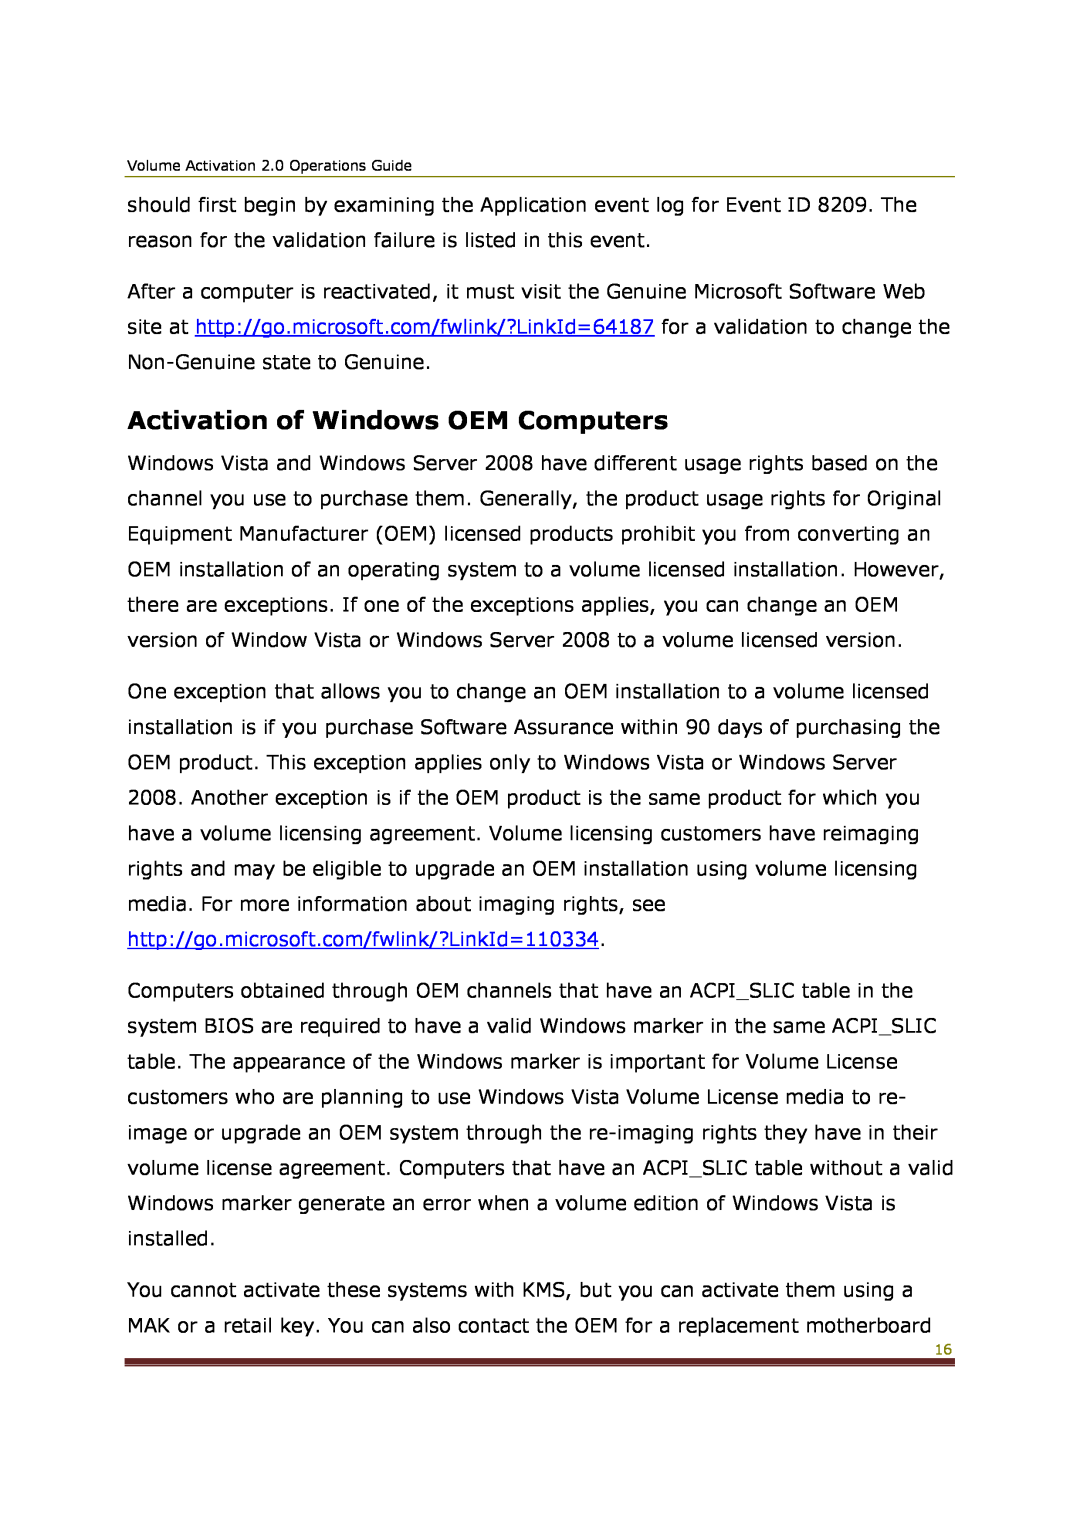 Microsoft 2 manual Activation of Windows OEM Computers 